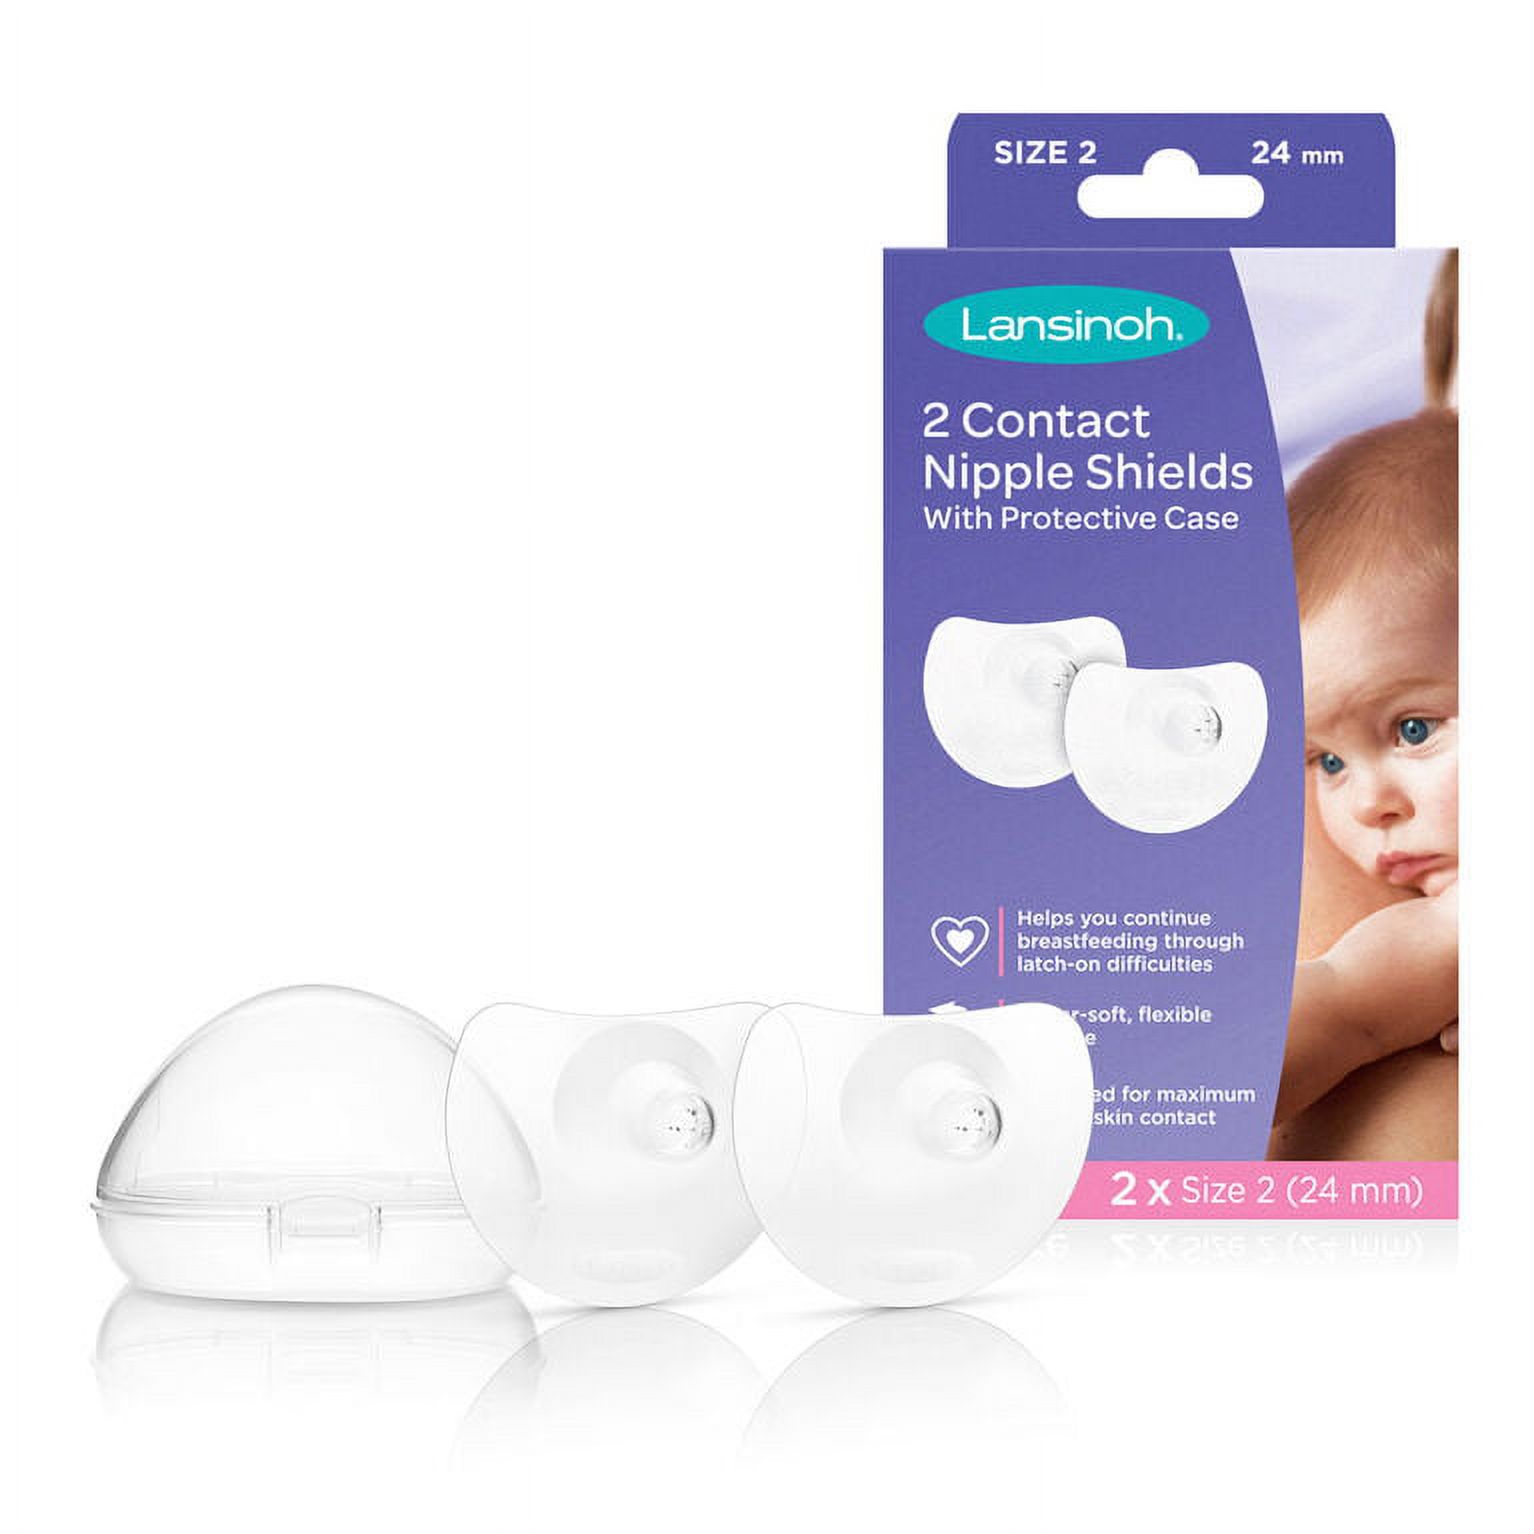 Non-Sterile Contact Nipple Shield 24 mm (2 Packs of 2 ct.) - image 2 of 2